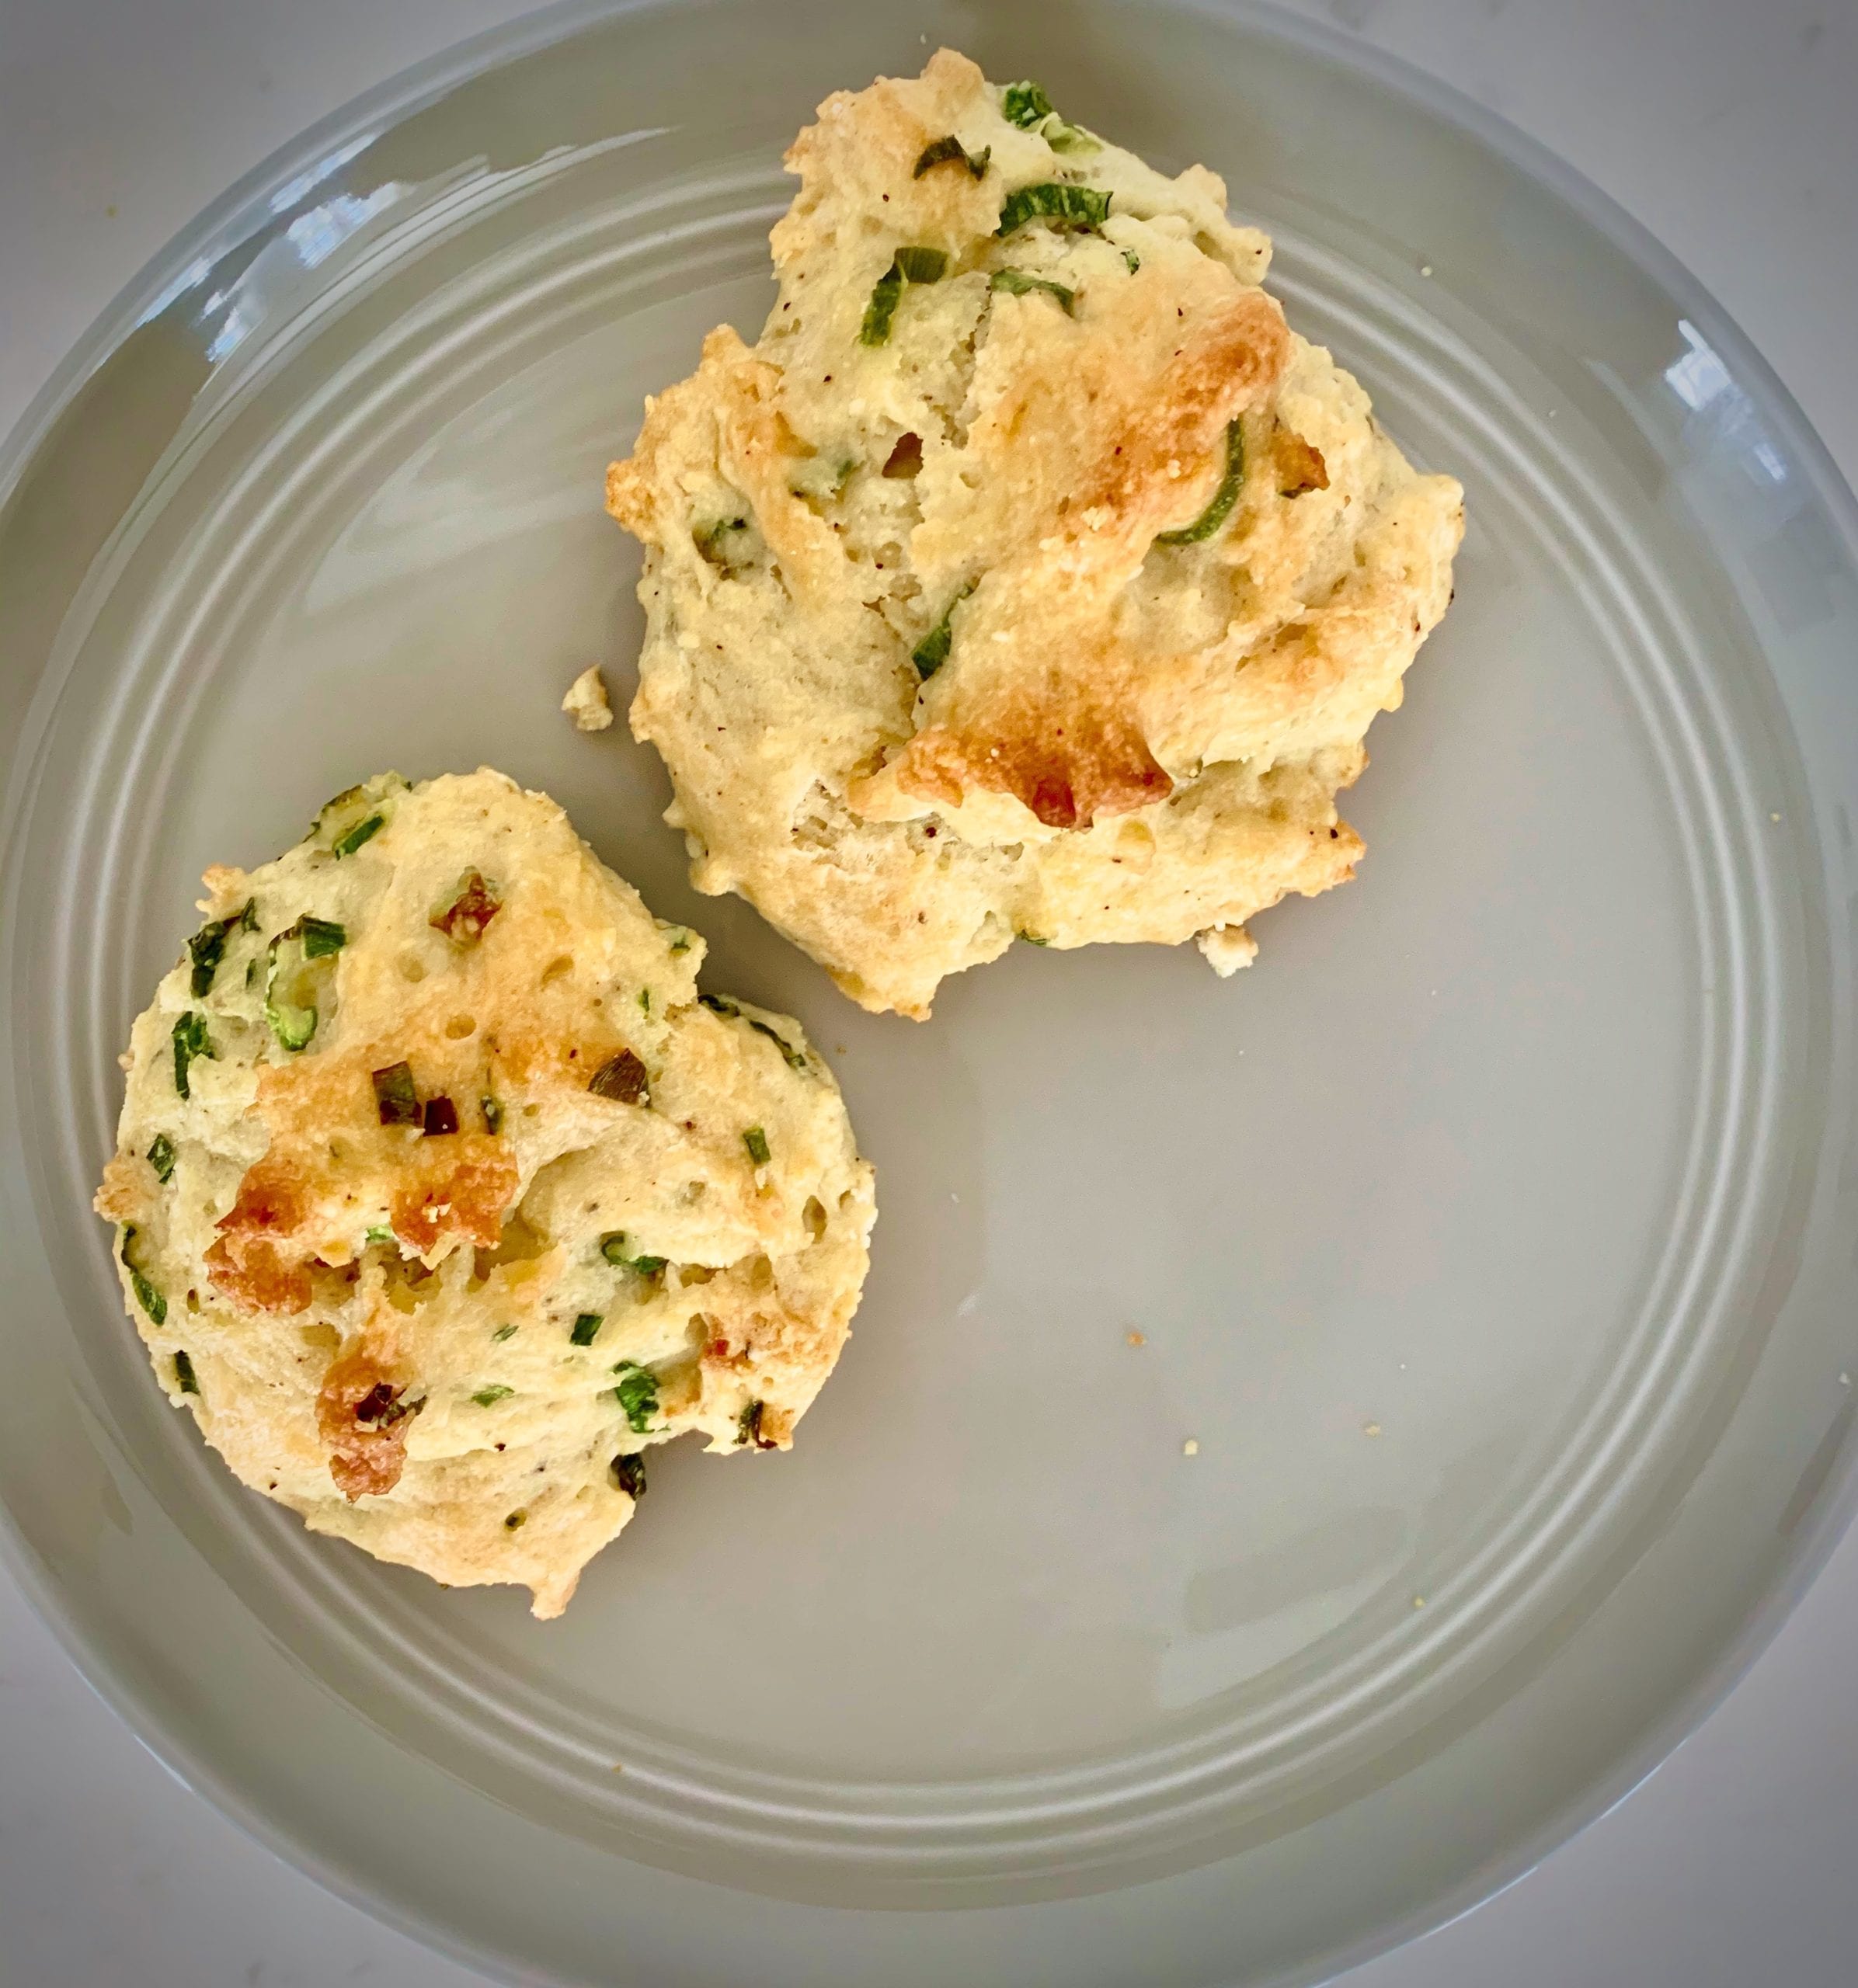 easy drop biscuits recipe, sour cream and chive drop biscuit recipe, easy sour cream drop biscuit recipe, easy drop biscuit recipe, drop biscuits easy, sour cream drop biscuits, best drop biscuit recipe, easy biscuit recipe